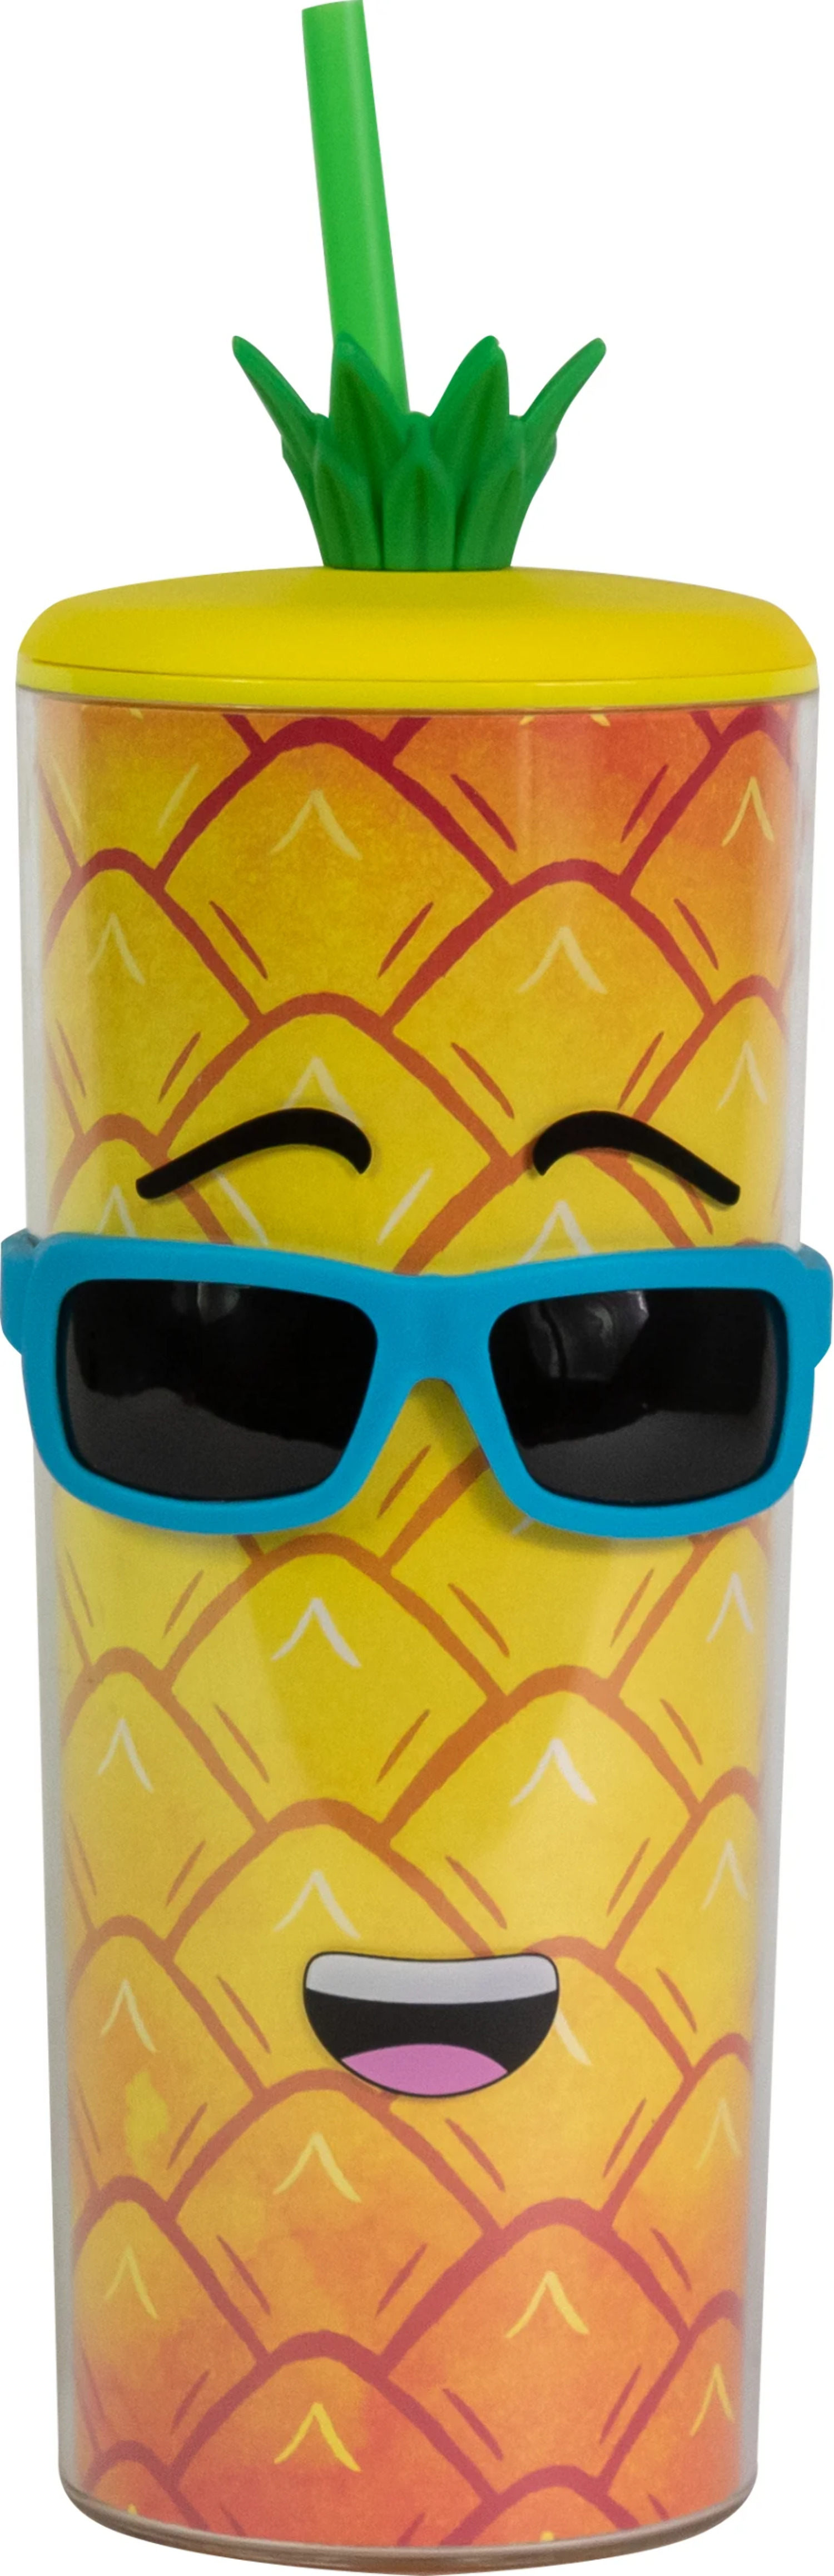 Cool Gear 4-Pack 20 oz Shady Fruit Tumbler With Pressure Fit Lid & Straw Included - image 2 of 7